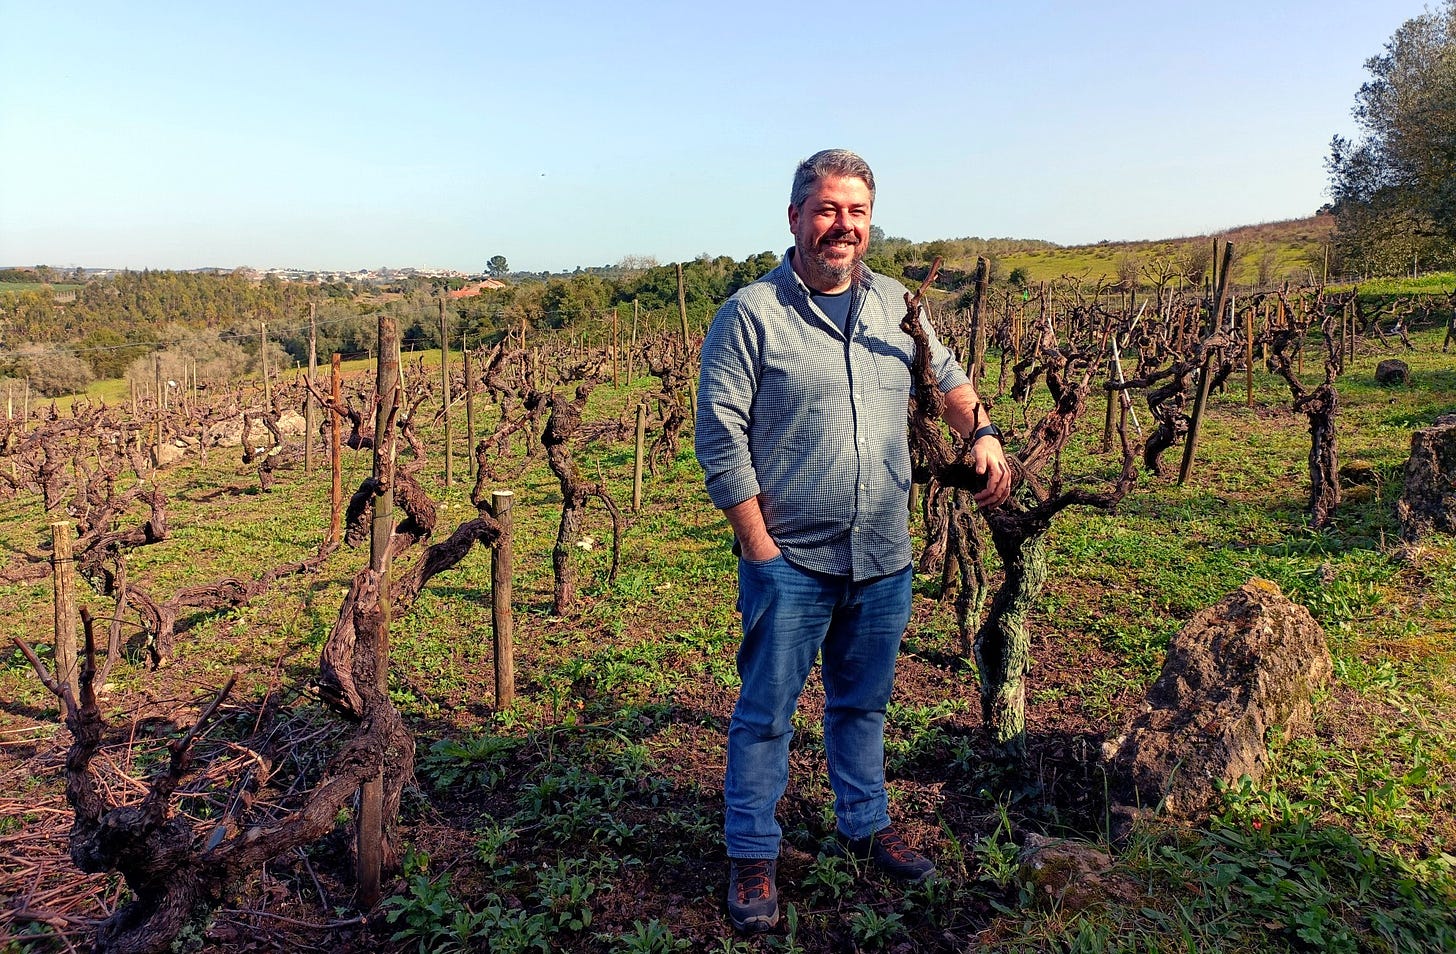 João Tereso with some 80 year old vines. Photo (C) Simon J Woolf.